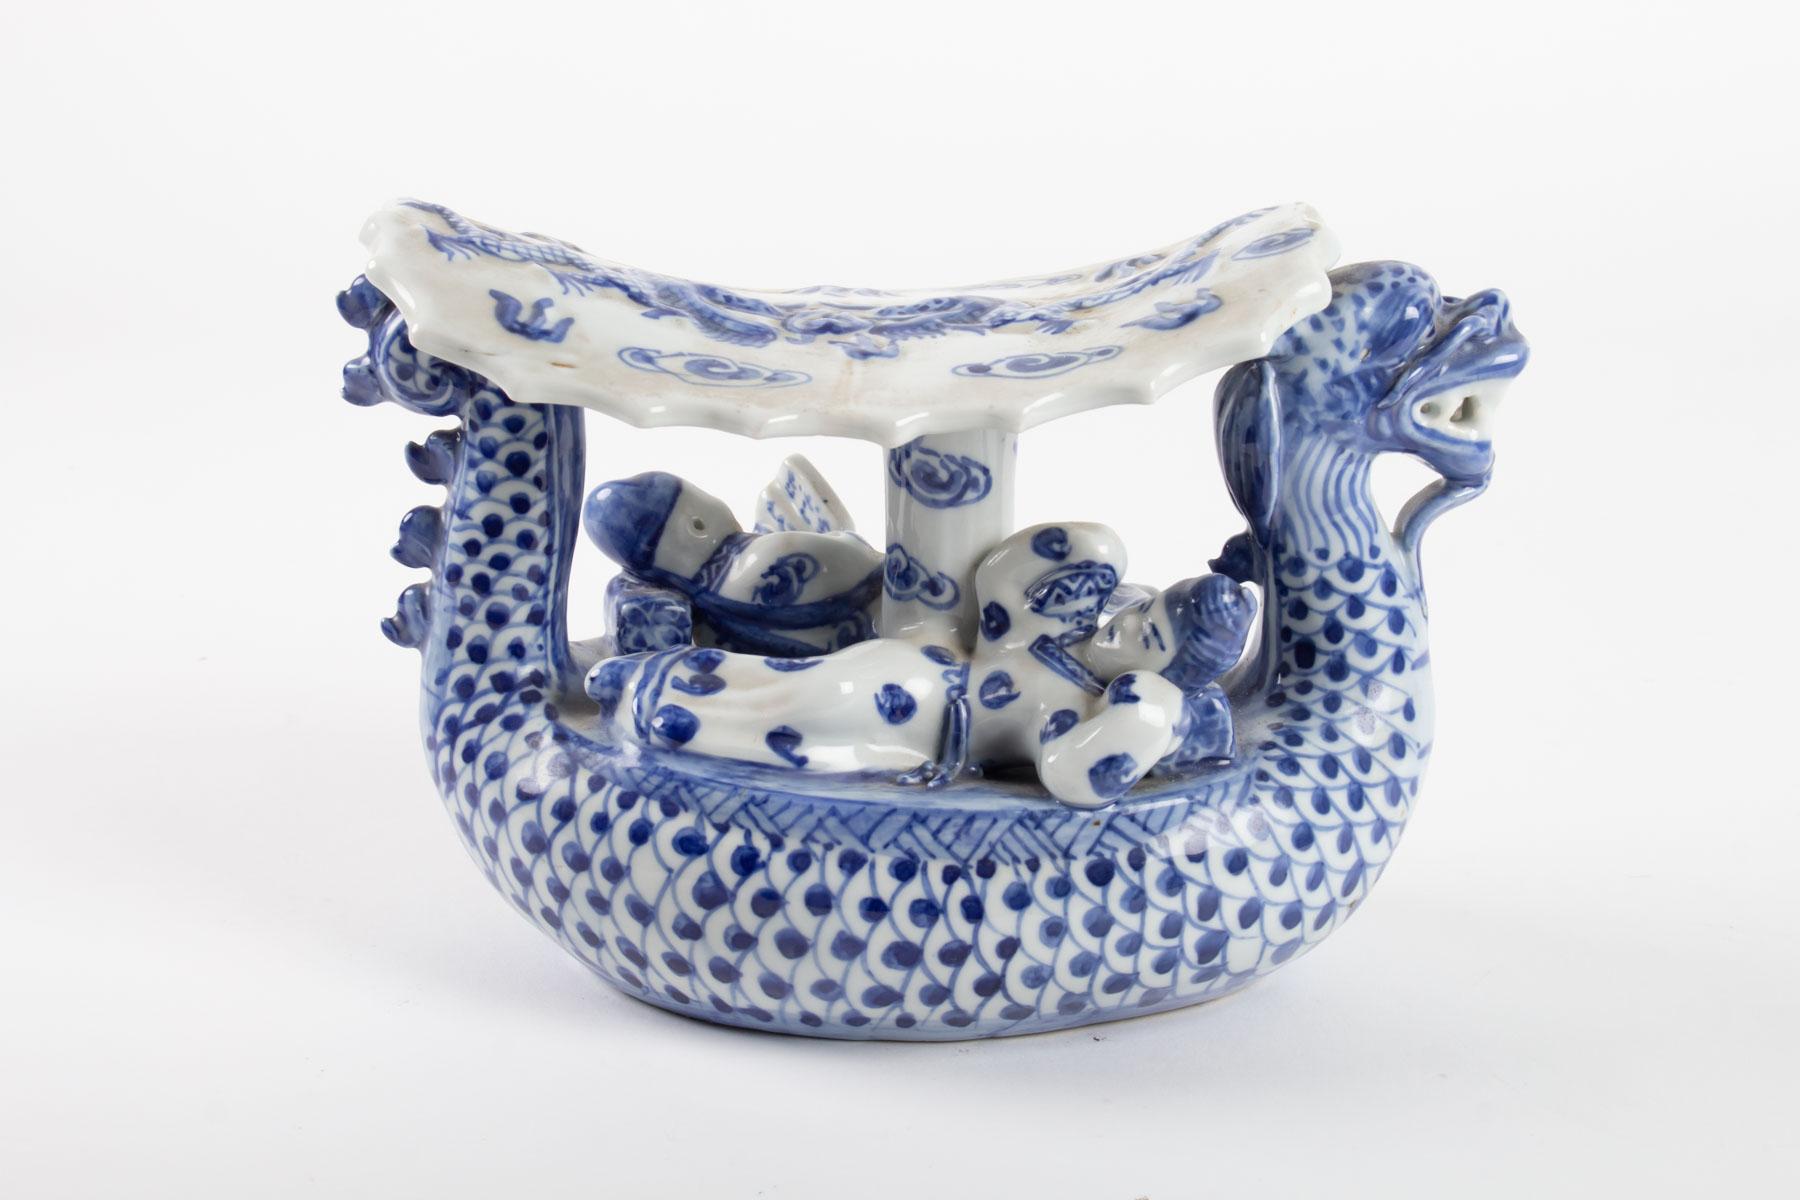 Chinese Export Chinese Porcelain Representative a Dragon Walking a Couple